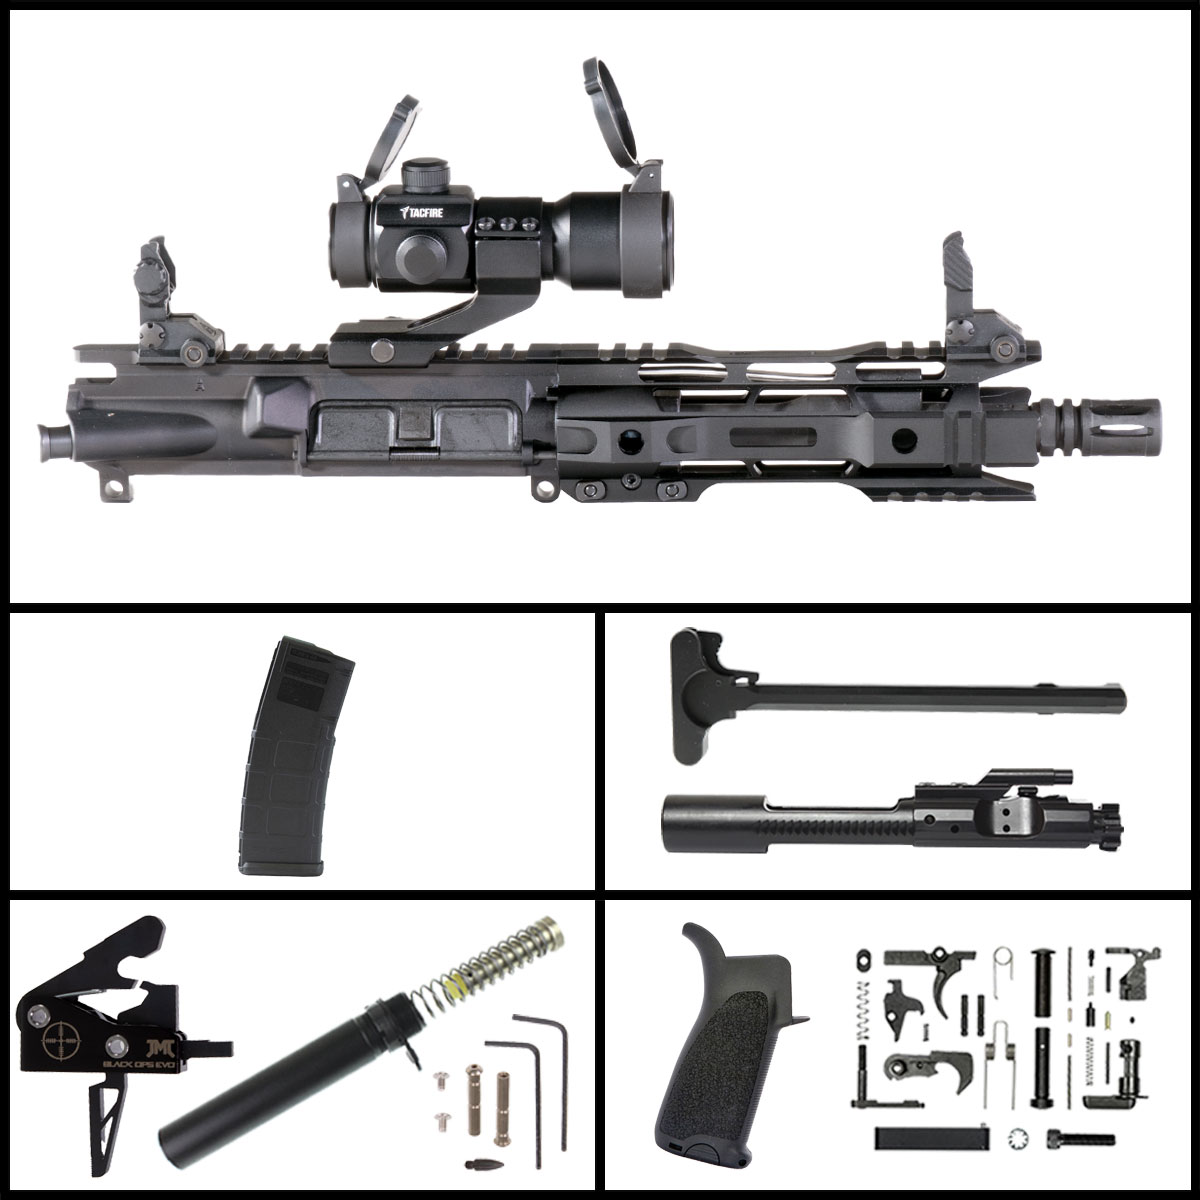 MMC 'Here and Now' 7.5-inch AR-15 5.56 NATO Manganese Phosphate Rifle Full Build Kit